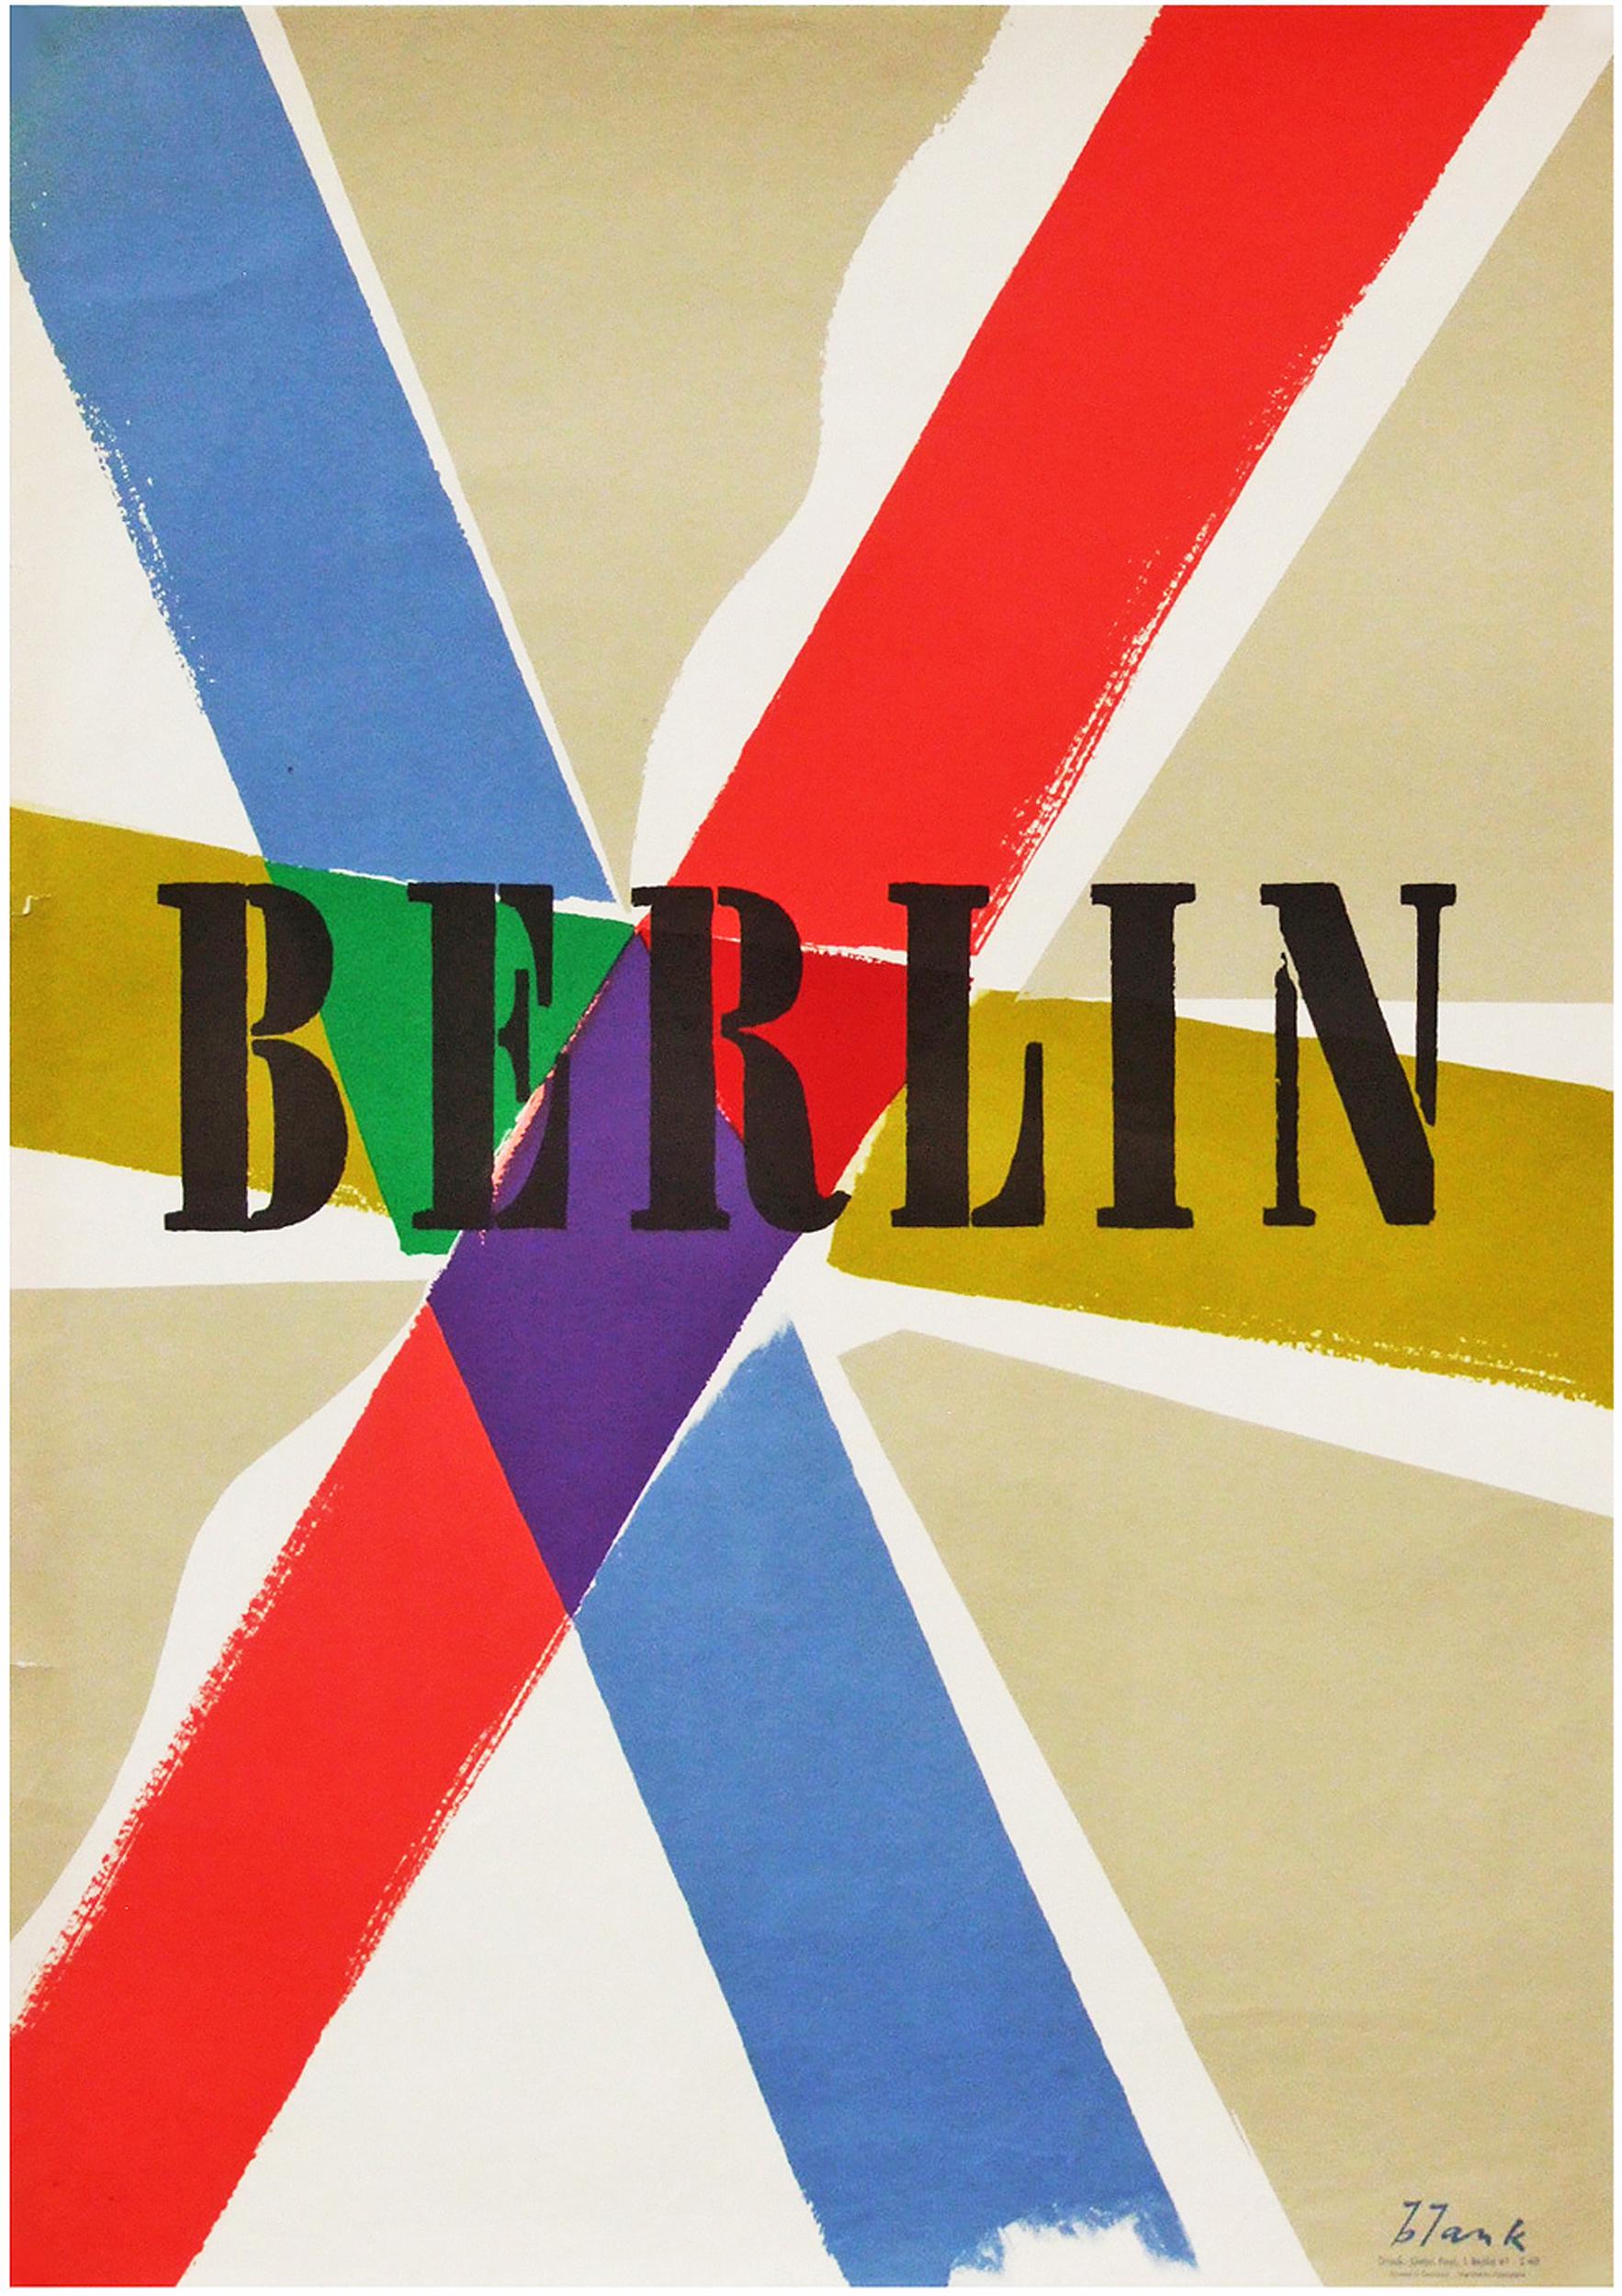 Original 1953 travel poster designed by Richard Blank for the Berlin tourist board, Germany.

First edition color offset lithograph printed by Feyl.

Rolled.

Measures: L 84 cm x W 59.5 cm.